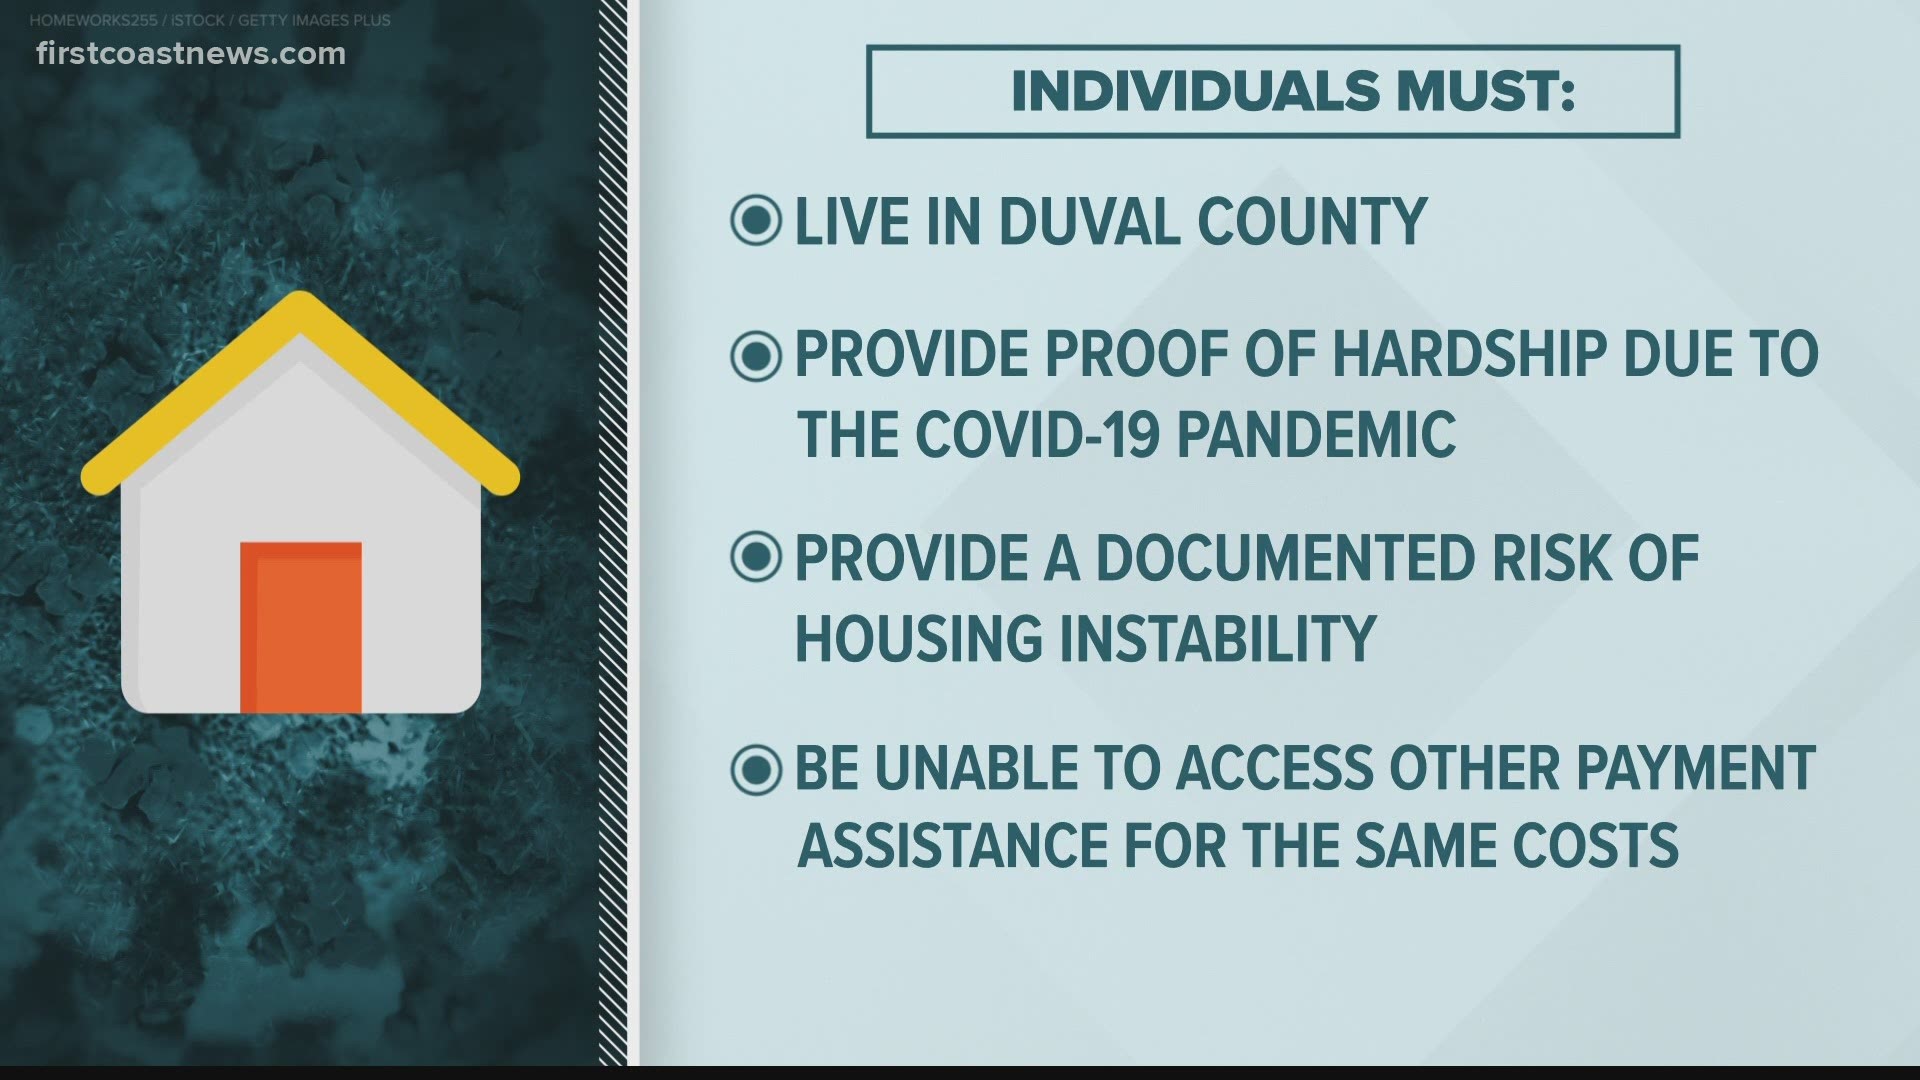 Here's how to apply for Jacksonville's emergency rental, utility assistance